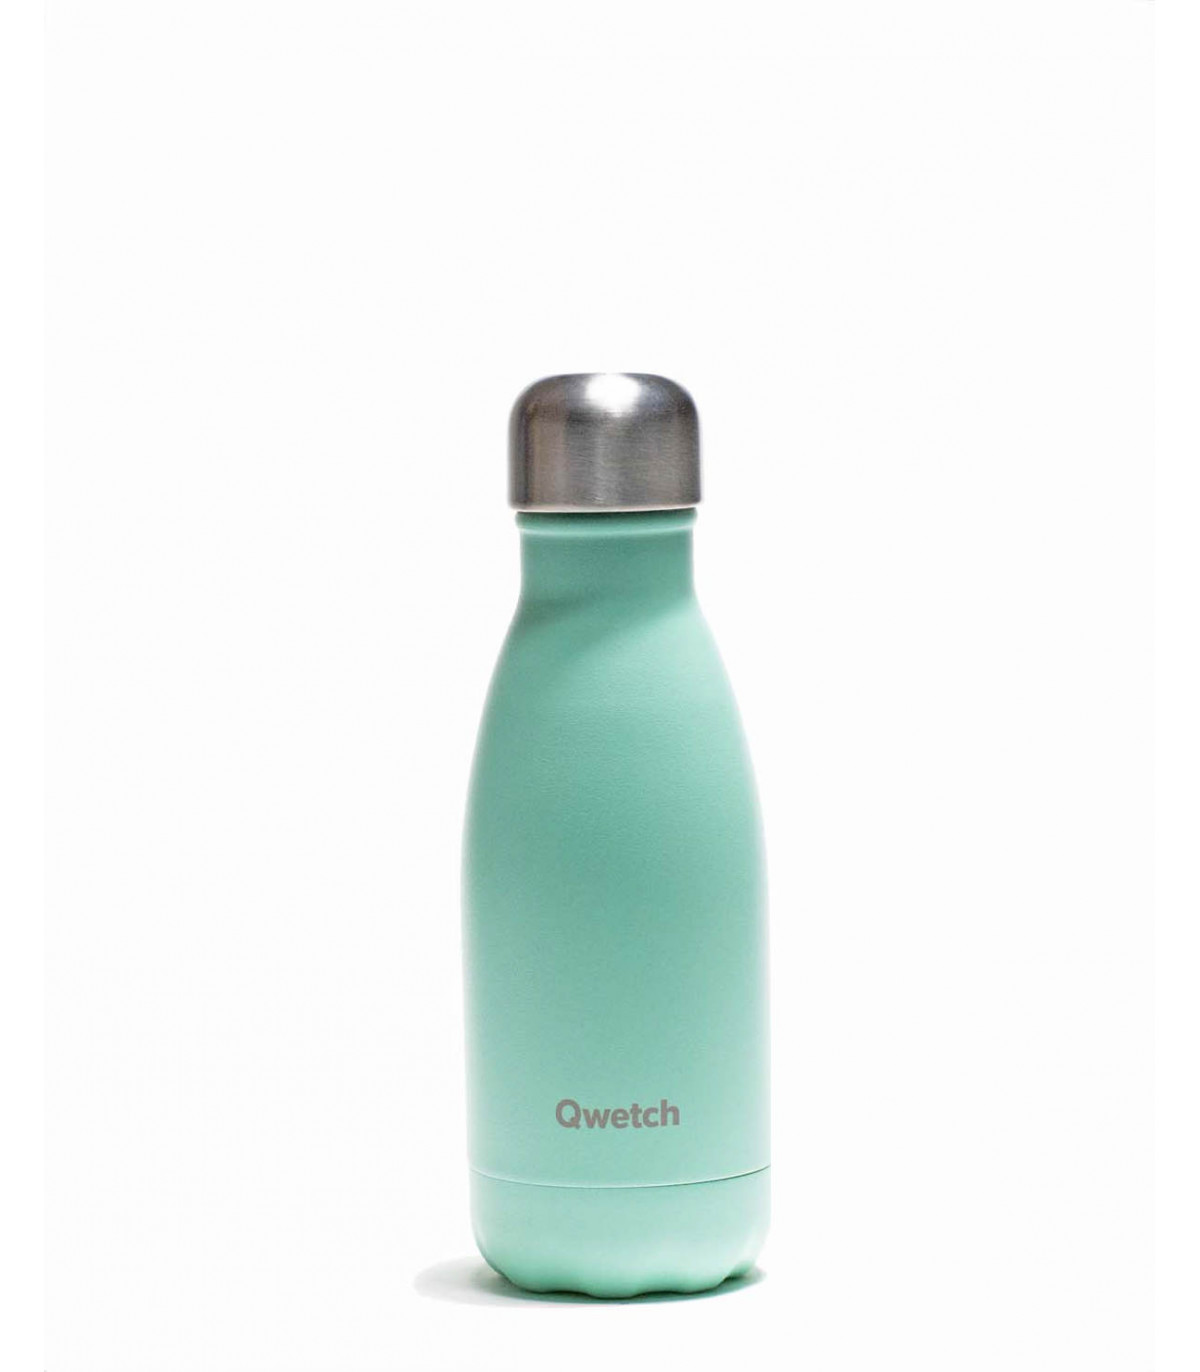 Ludilabel  Gourde bouteille isotherme - Granite bleu - 260ml - Qwetch